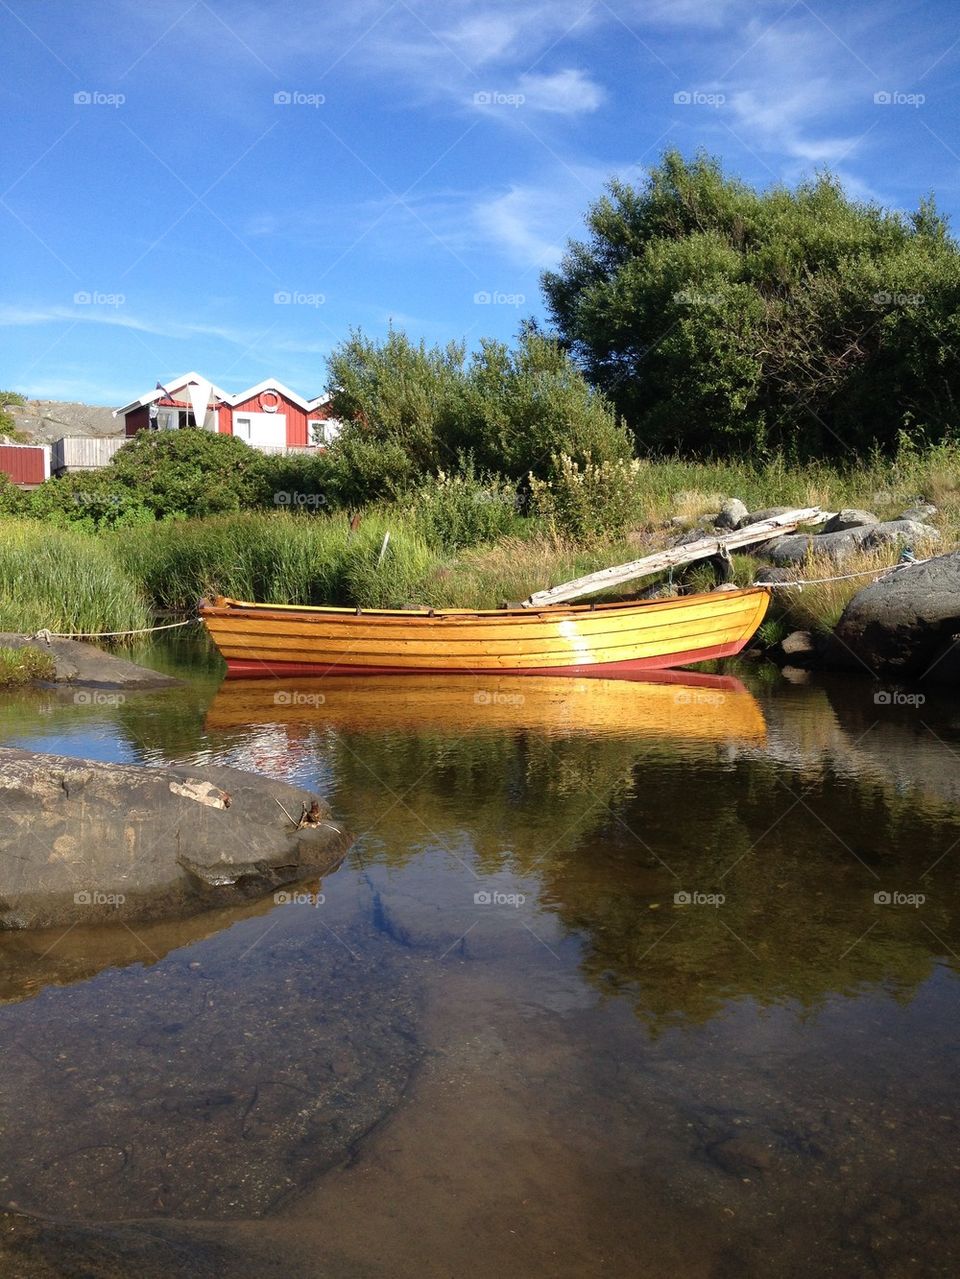 The woodenboat in the ocean again